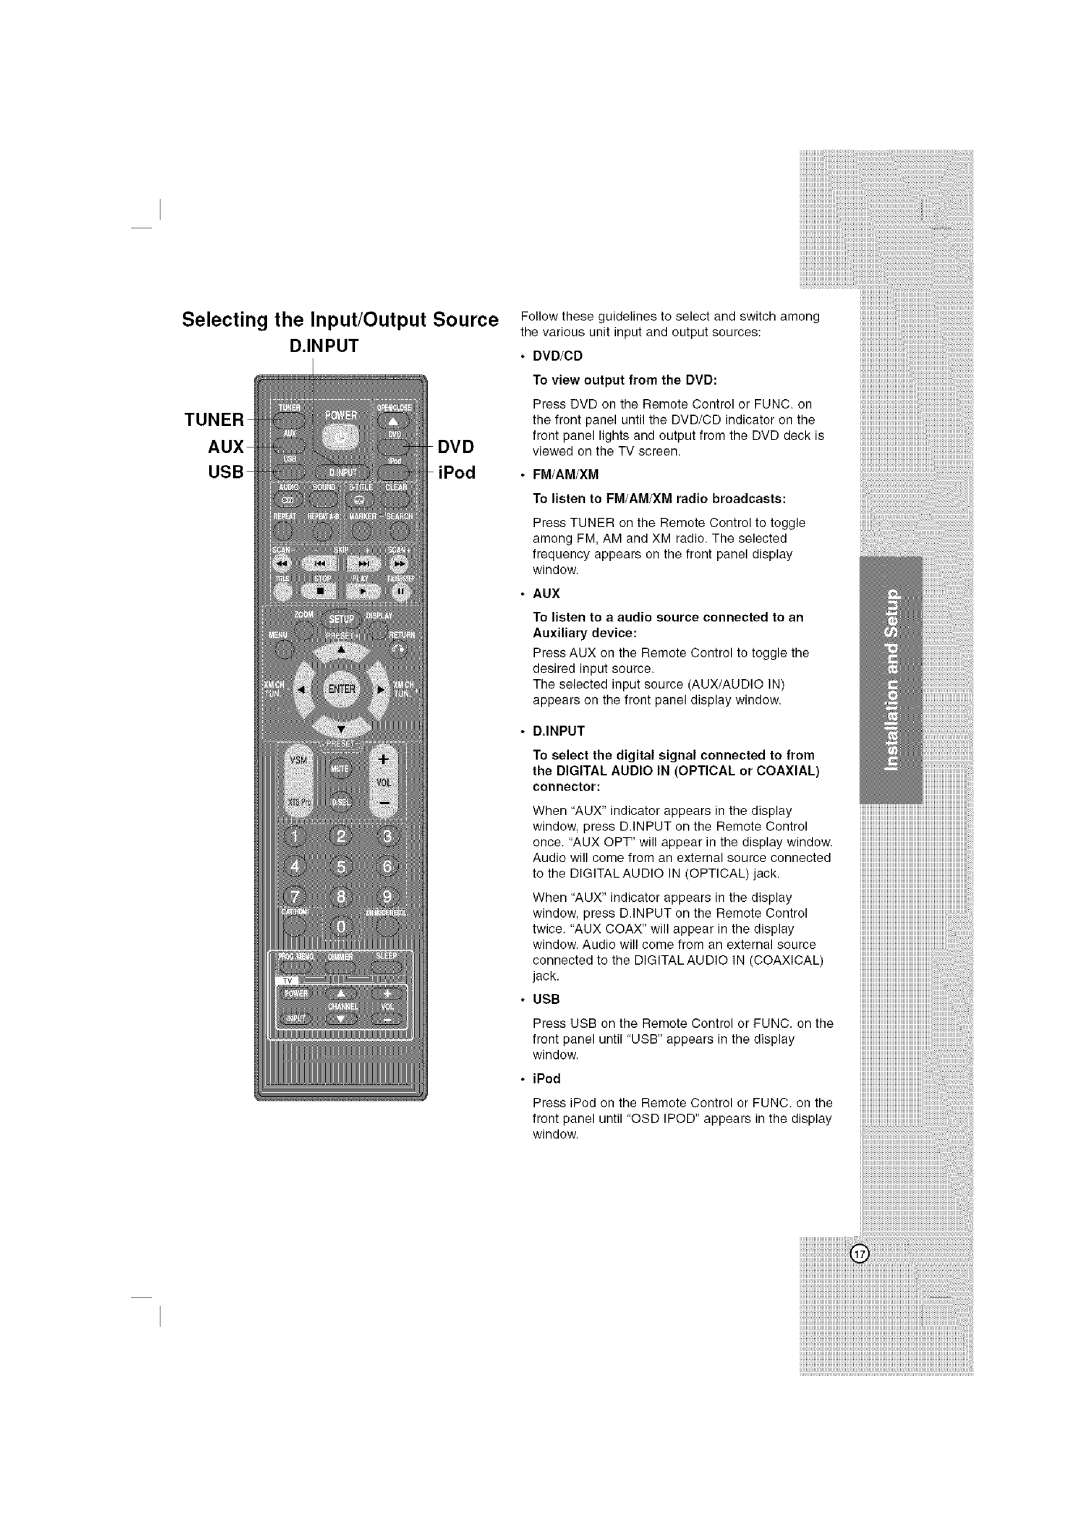 LG Electronics LHT764 Selecting the Input/Output Source D.INPUT TUNER, AUXDVD USBiPod, DVD/CD To view output from the DVD 